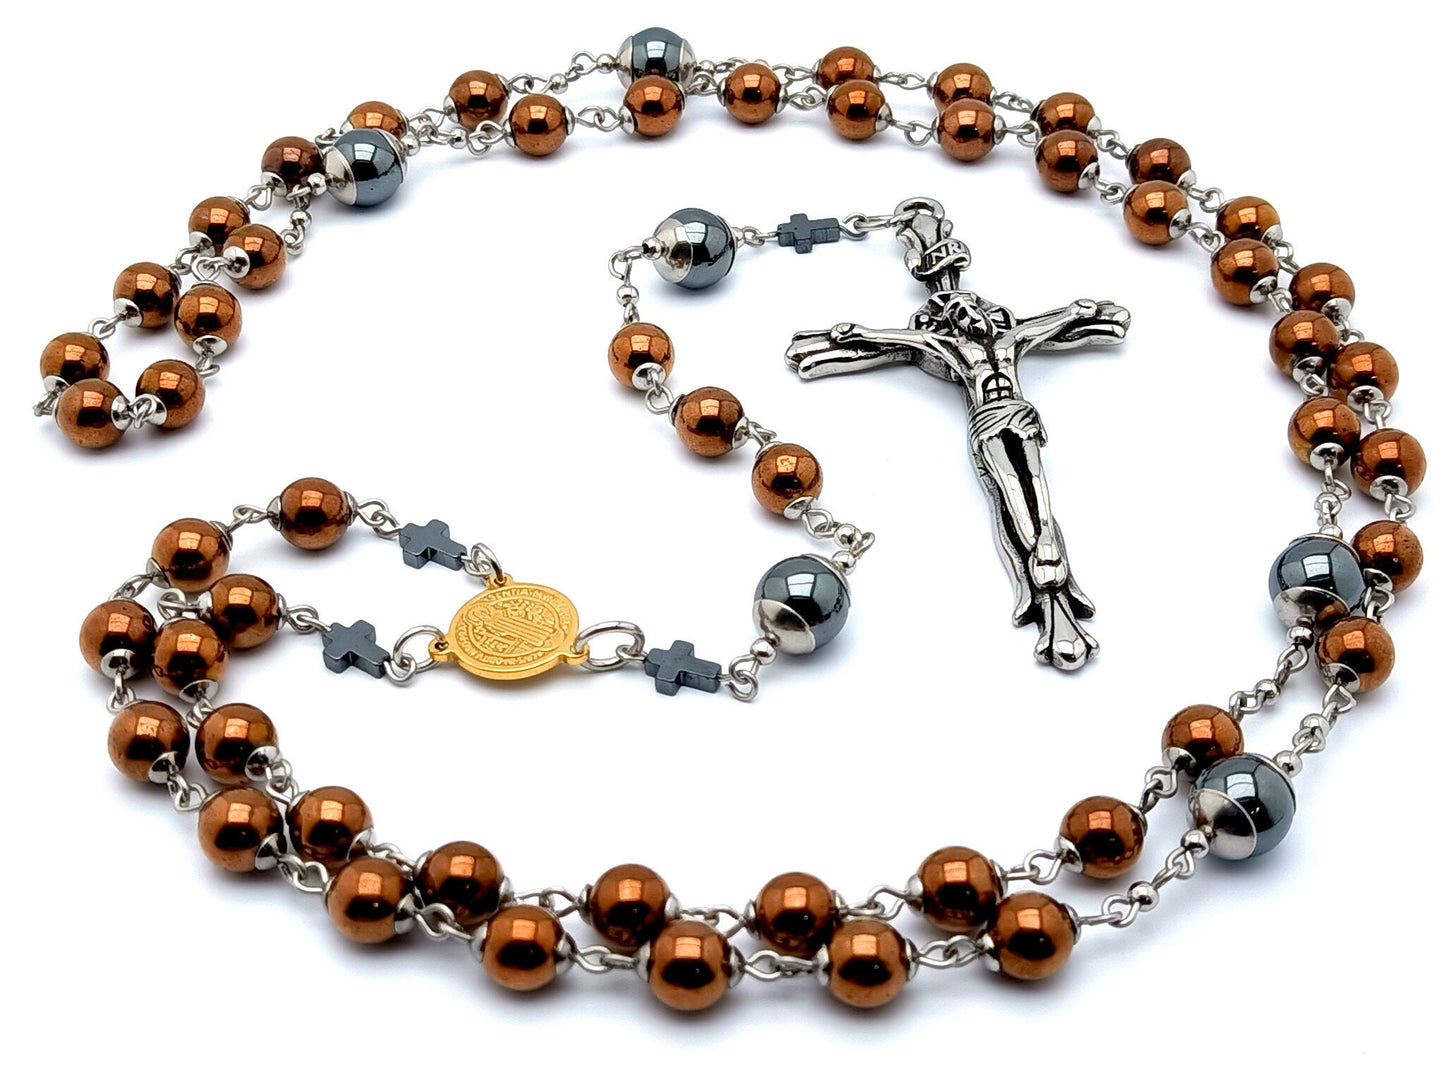 Saint Benedict unique rosary beads copper and grey hematite gemstone rosary beads with stainless steel crucifix and hematite linking cross beads.